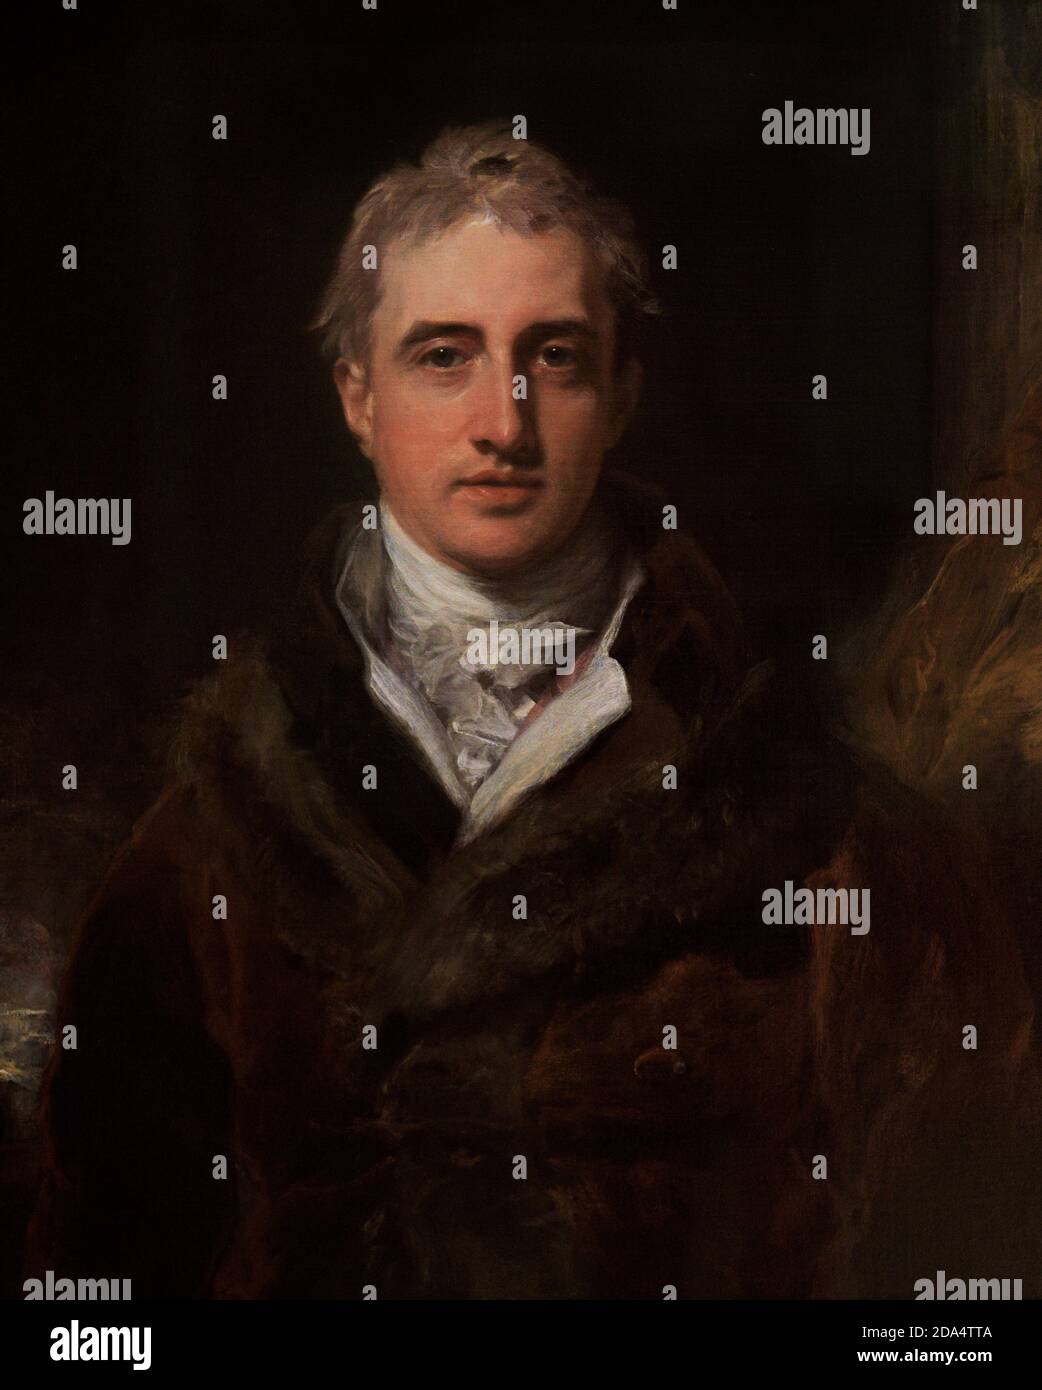 Robert Stewart, 2nd Marquess of Londonderry, known as Lord Castlereagh (1769-1822). Irish statesman. Portrait by Sir Thomas Lawrence (1769-1830). Oil on canvas, 1809-1810. National Portrait Gallery. London, England, United Kingdom. Stock Photo